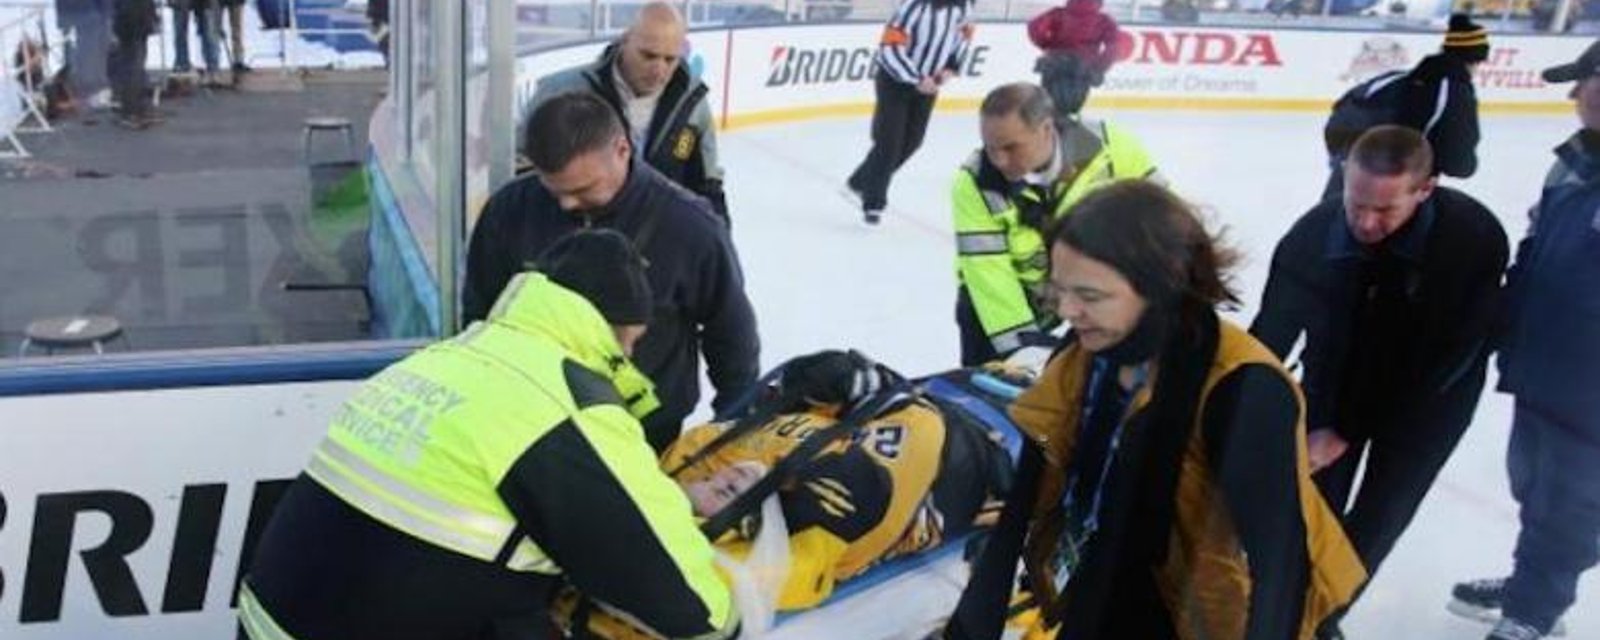 Player suffered spinal cord injury at Winter Classic.